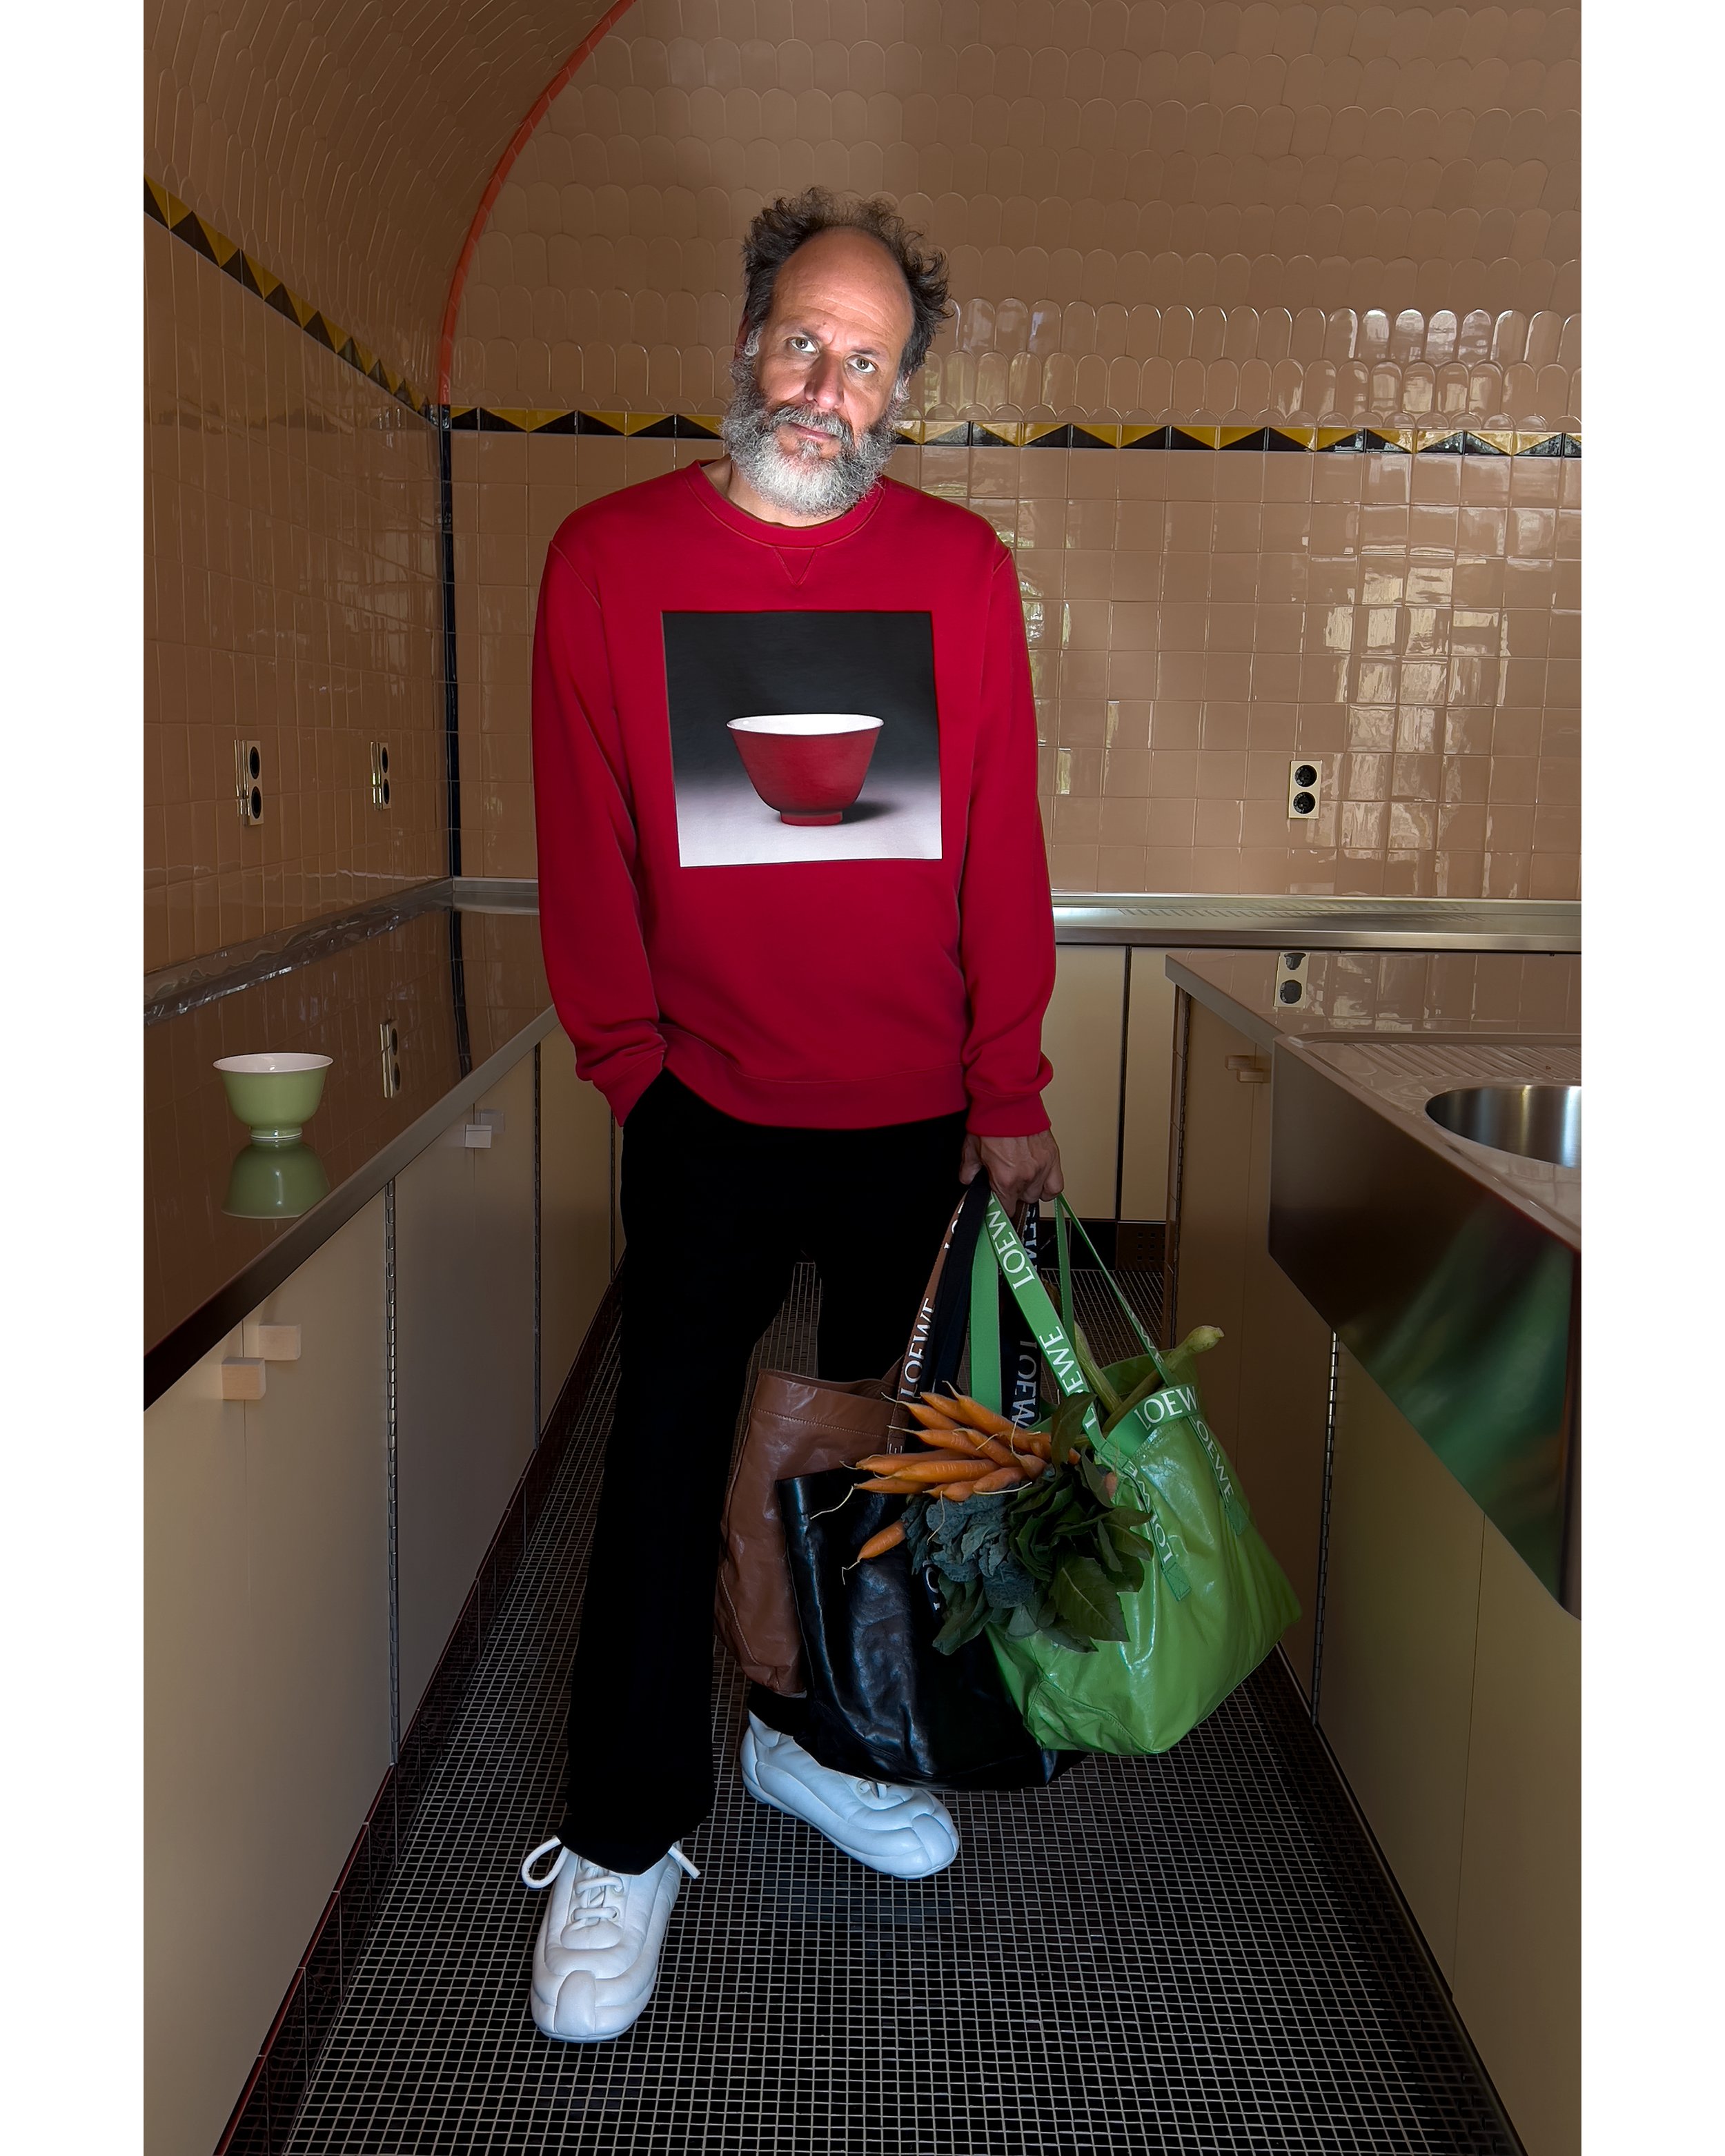 Loewe Launches Spring-Summer 2023 Pre-Collection Campaign By Juergen Teller  — SSI Life